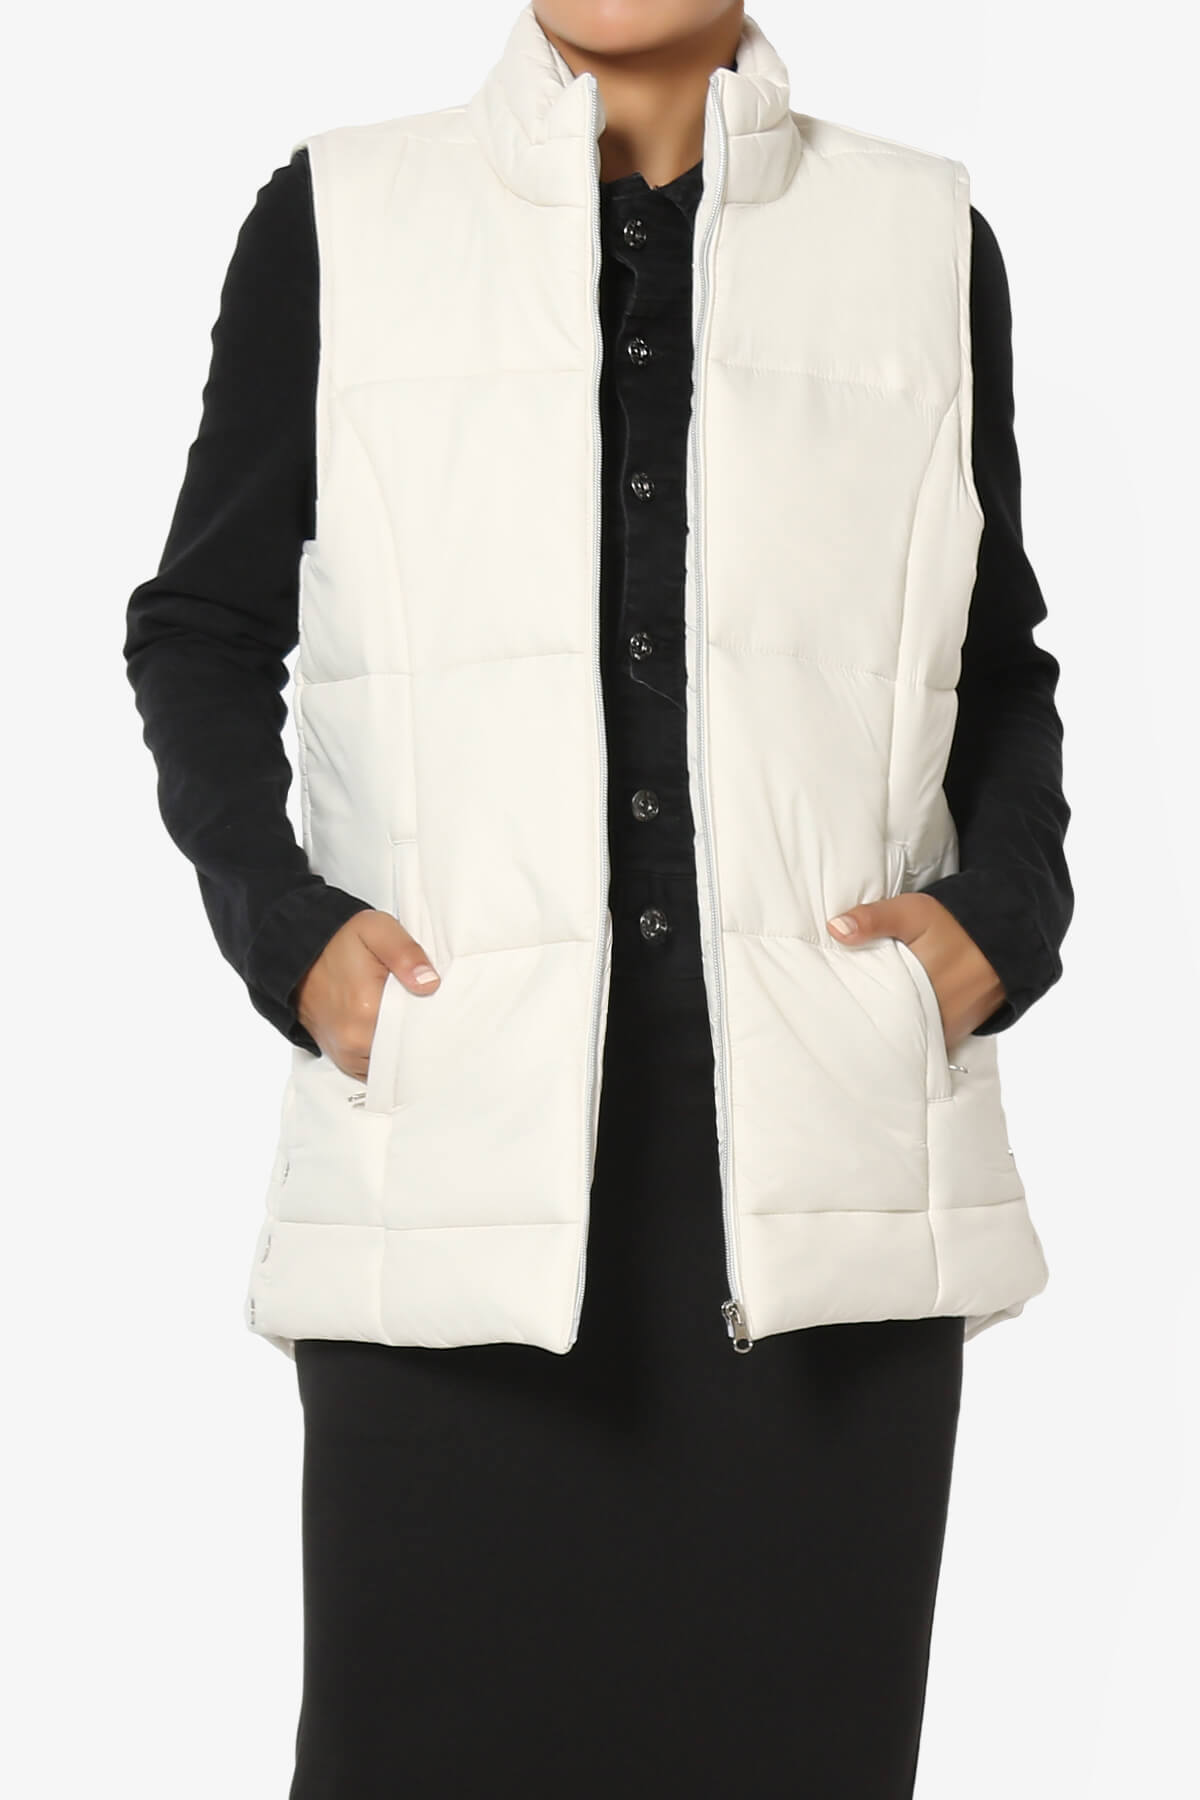 Spring Quilted Padded Vest Gilet Quilted Puffer Sleeveless -  Ireland